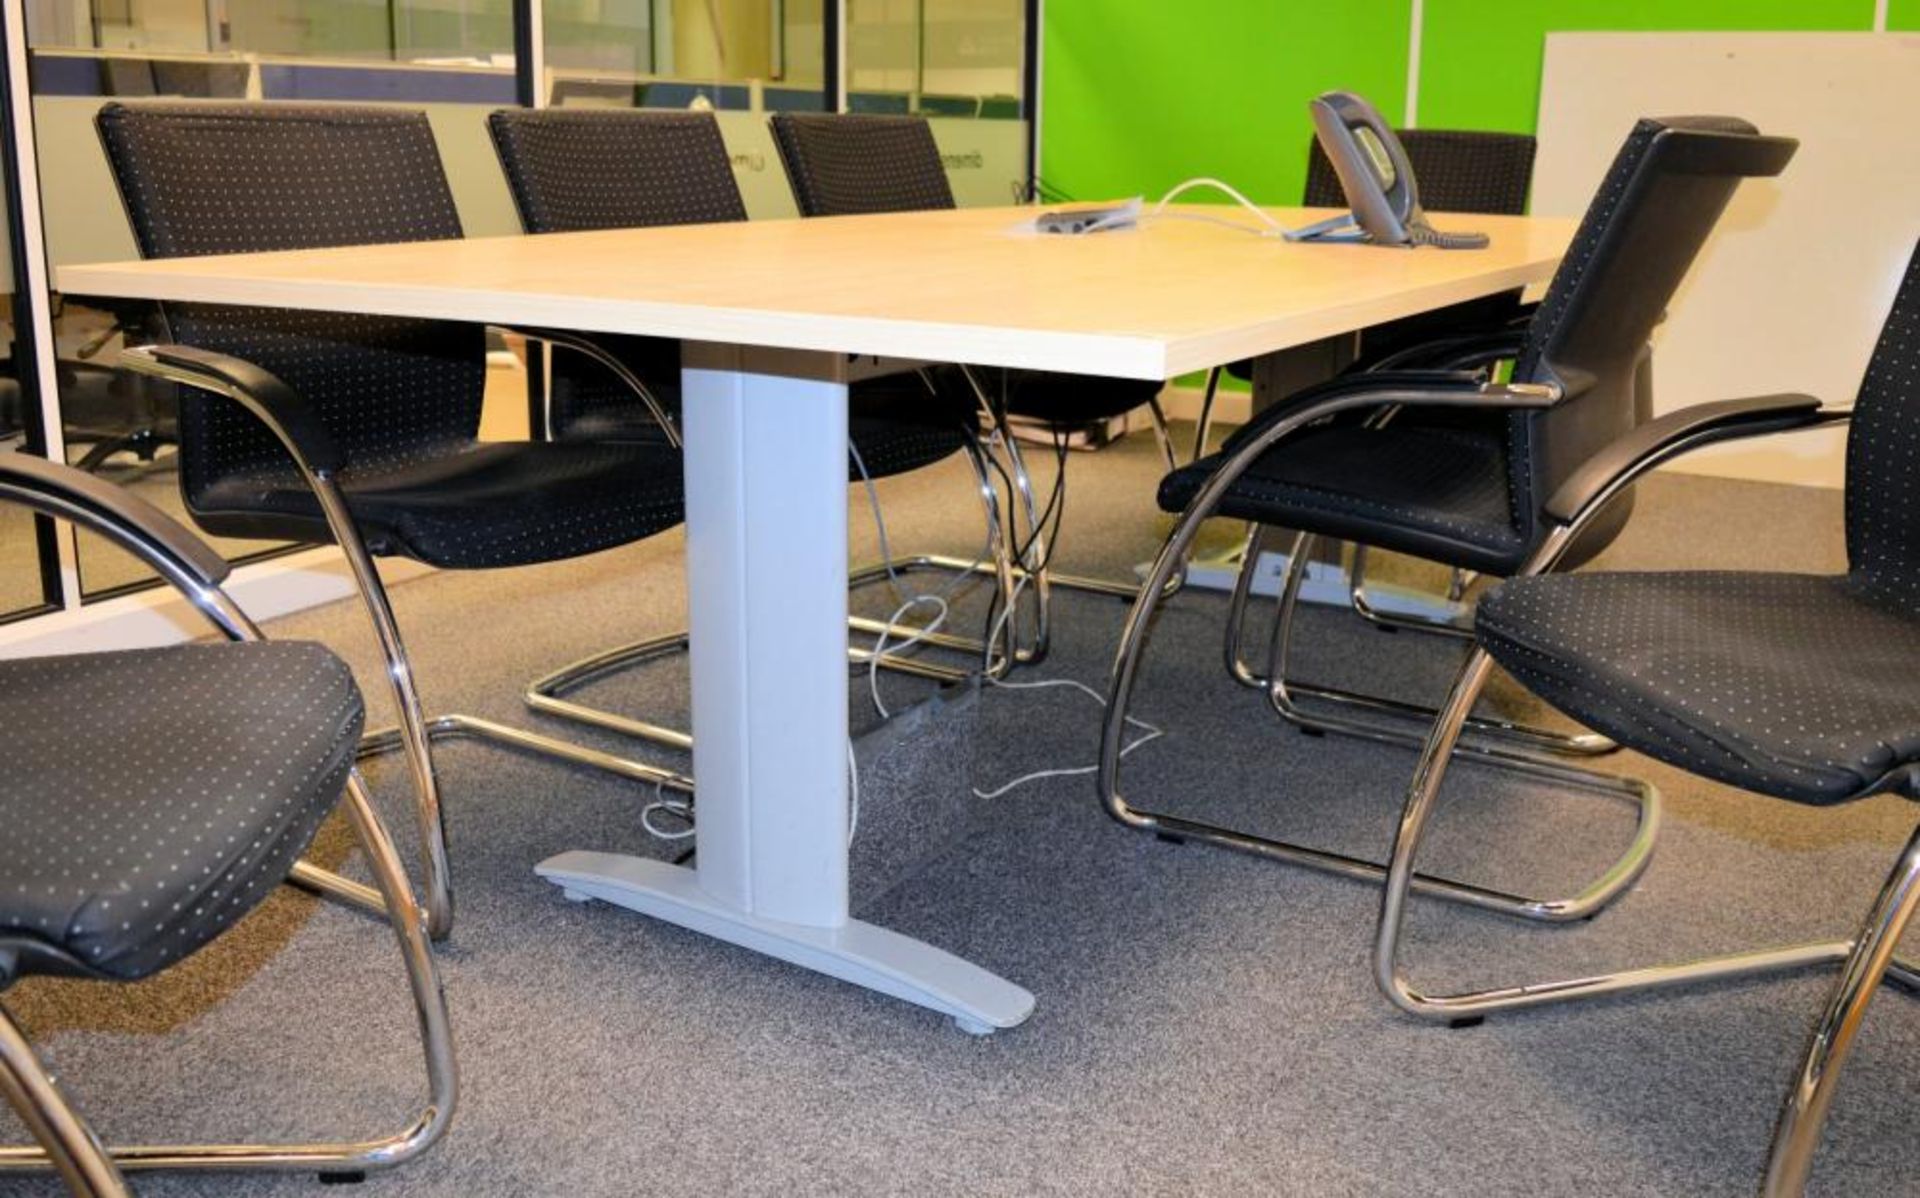 8 x Stackable Boardroom Meeting Chairs in Black With Chrome Stands and Arm Rests - Contemporary - Image 3 of 7